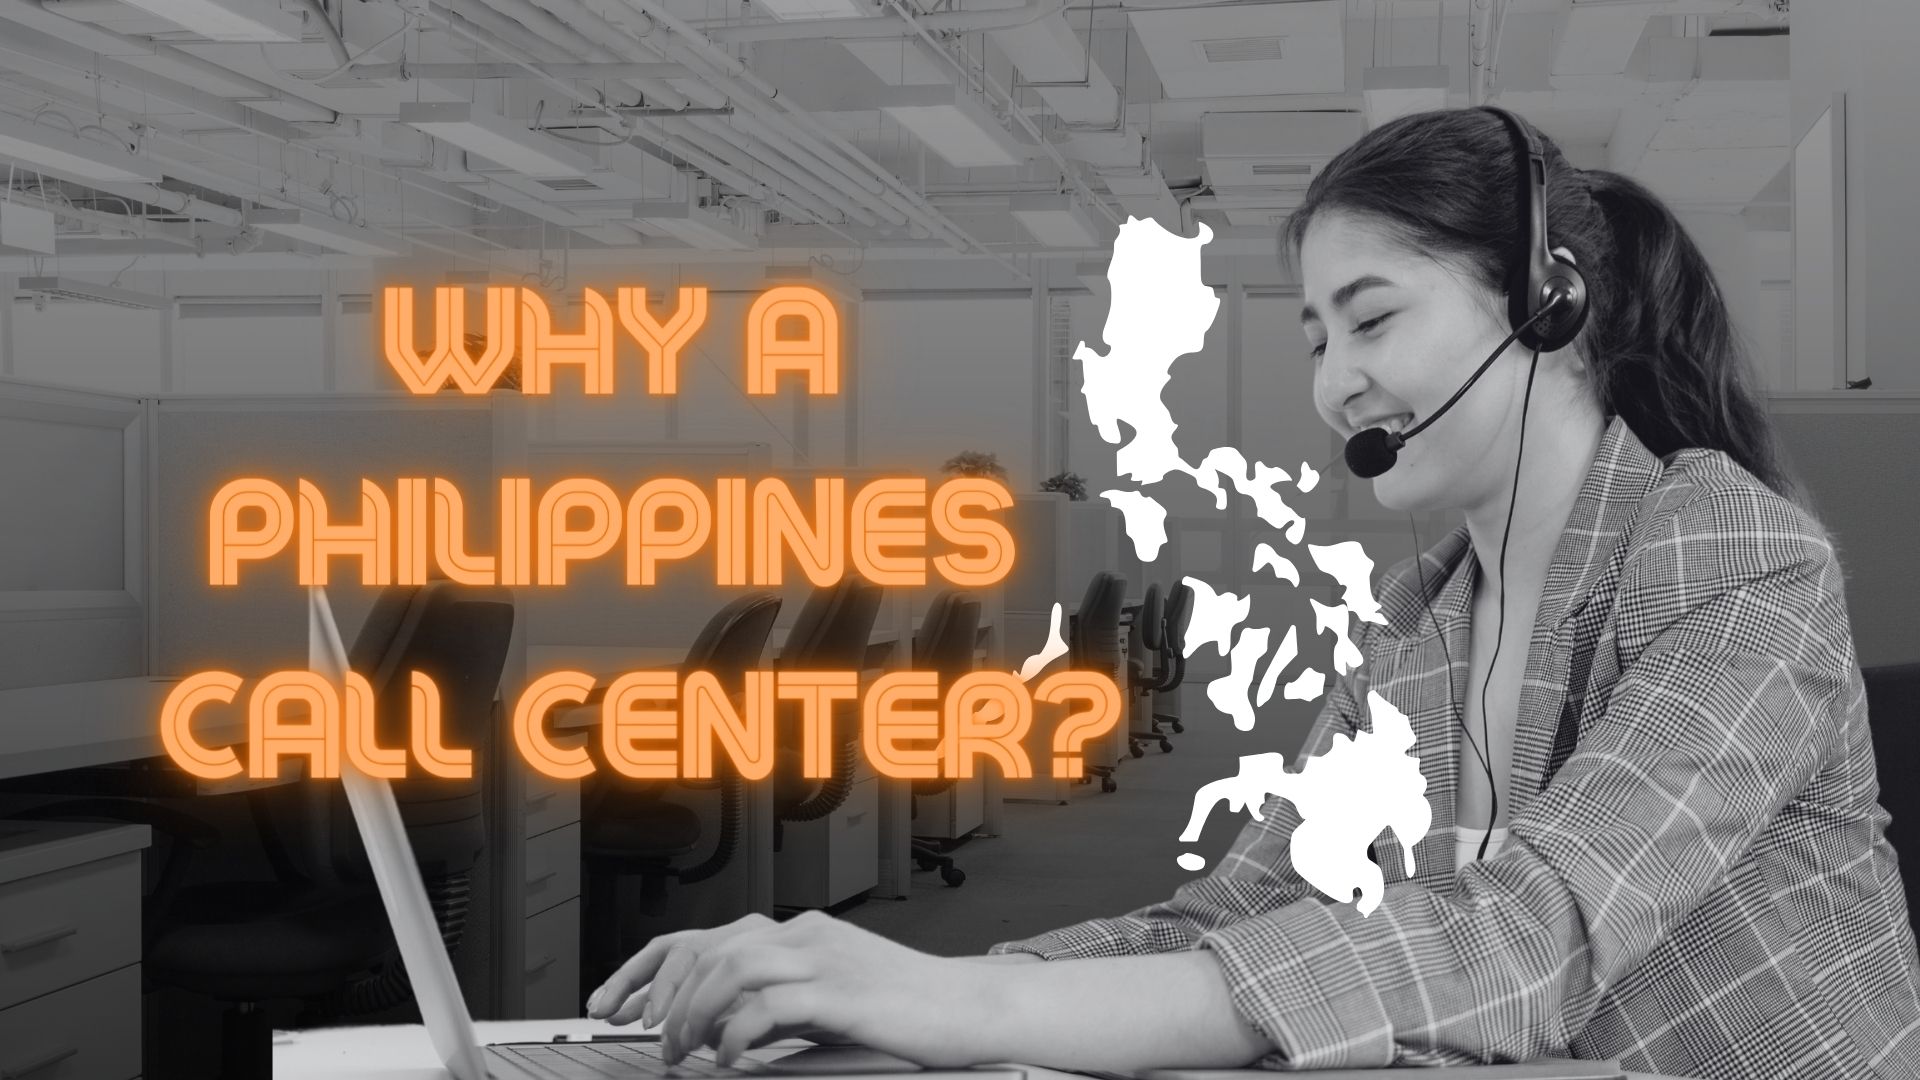 What is the purpose of a call center in the Philippines